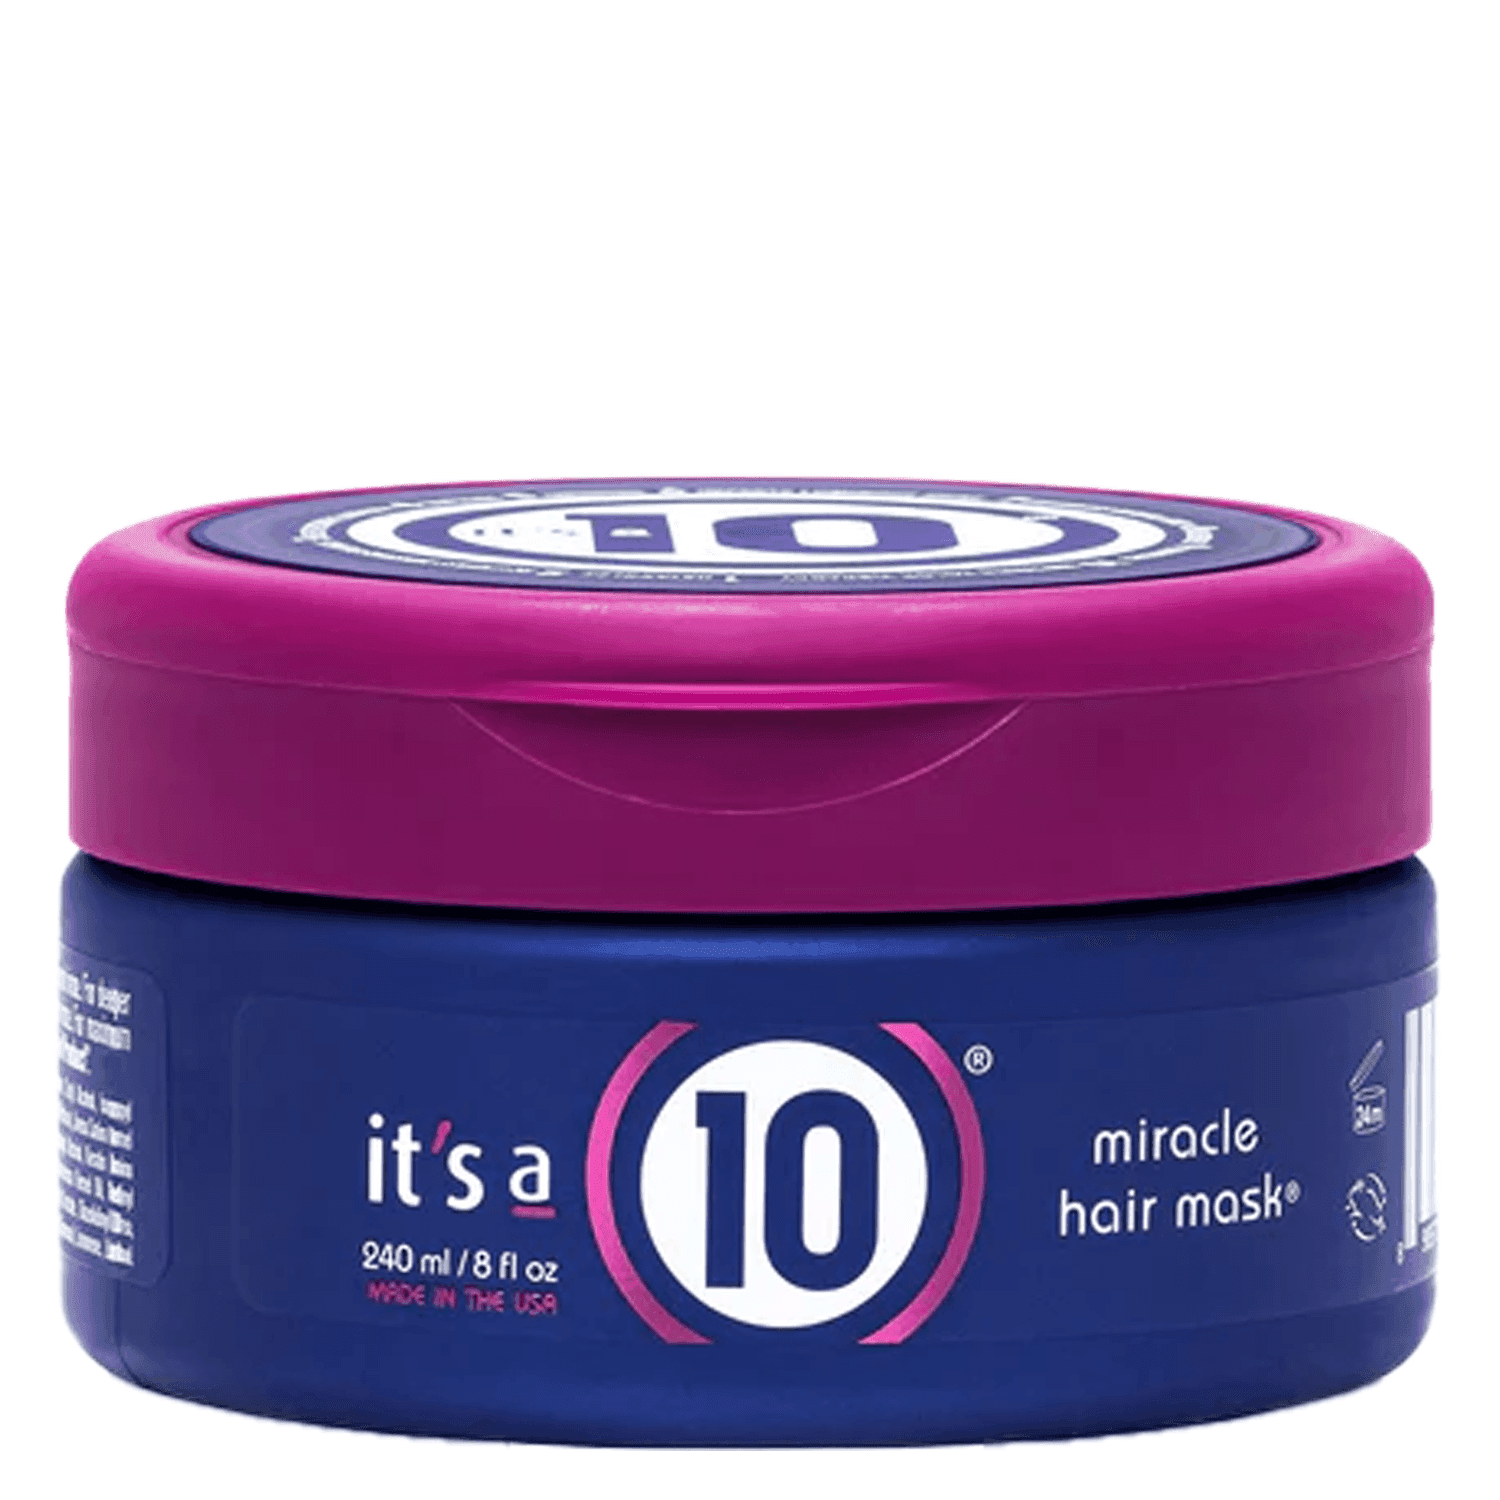 it's a 10 haircare - Miracle Hair Mask